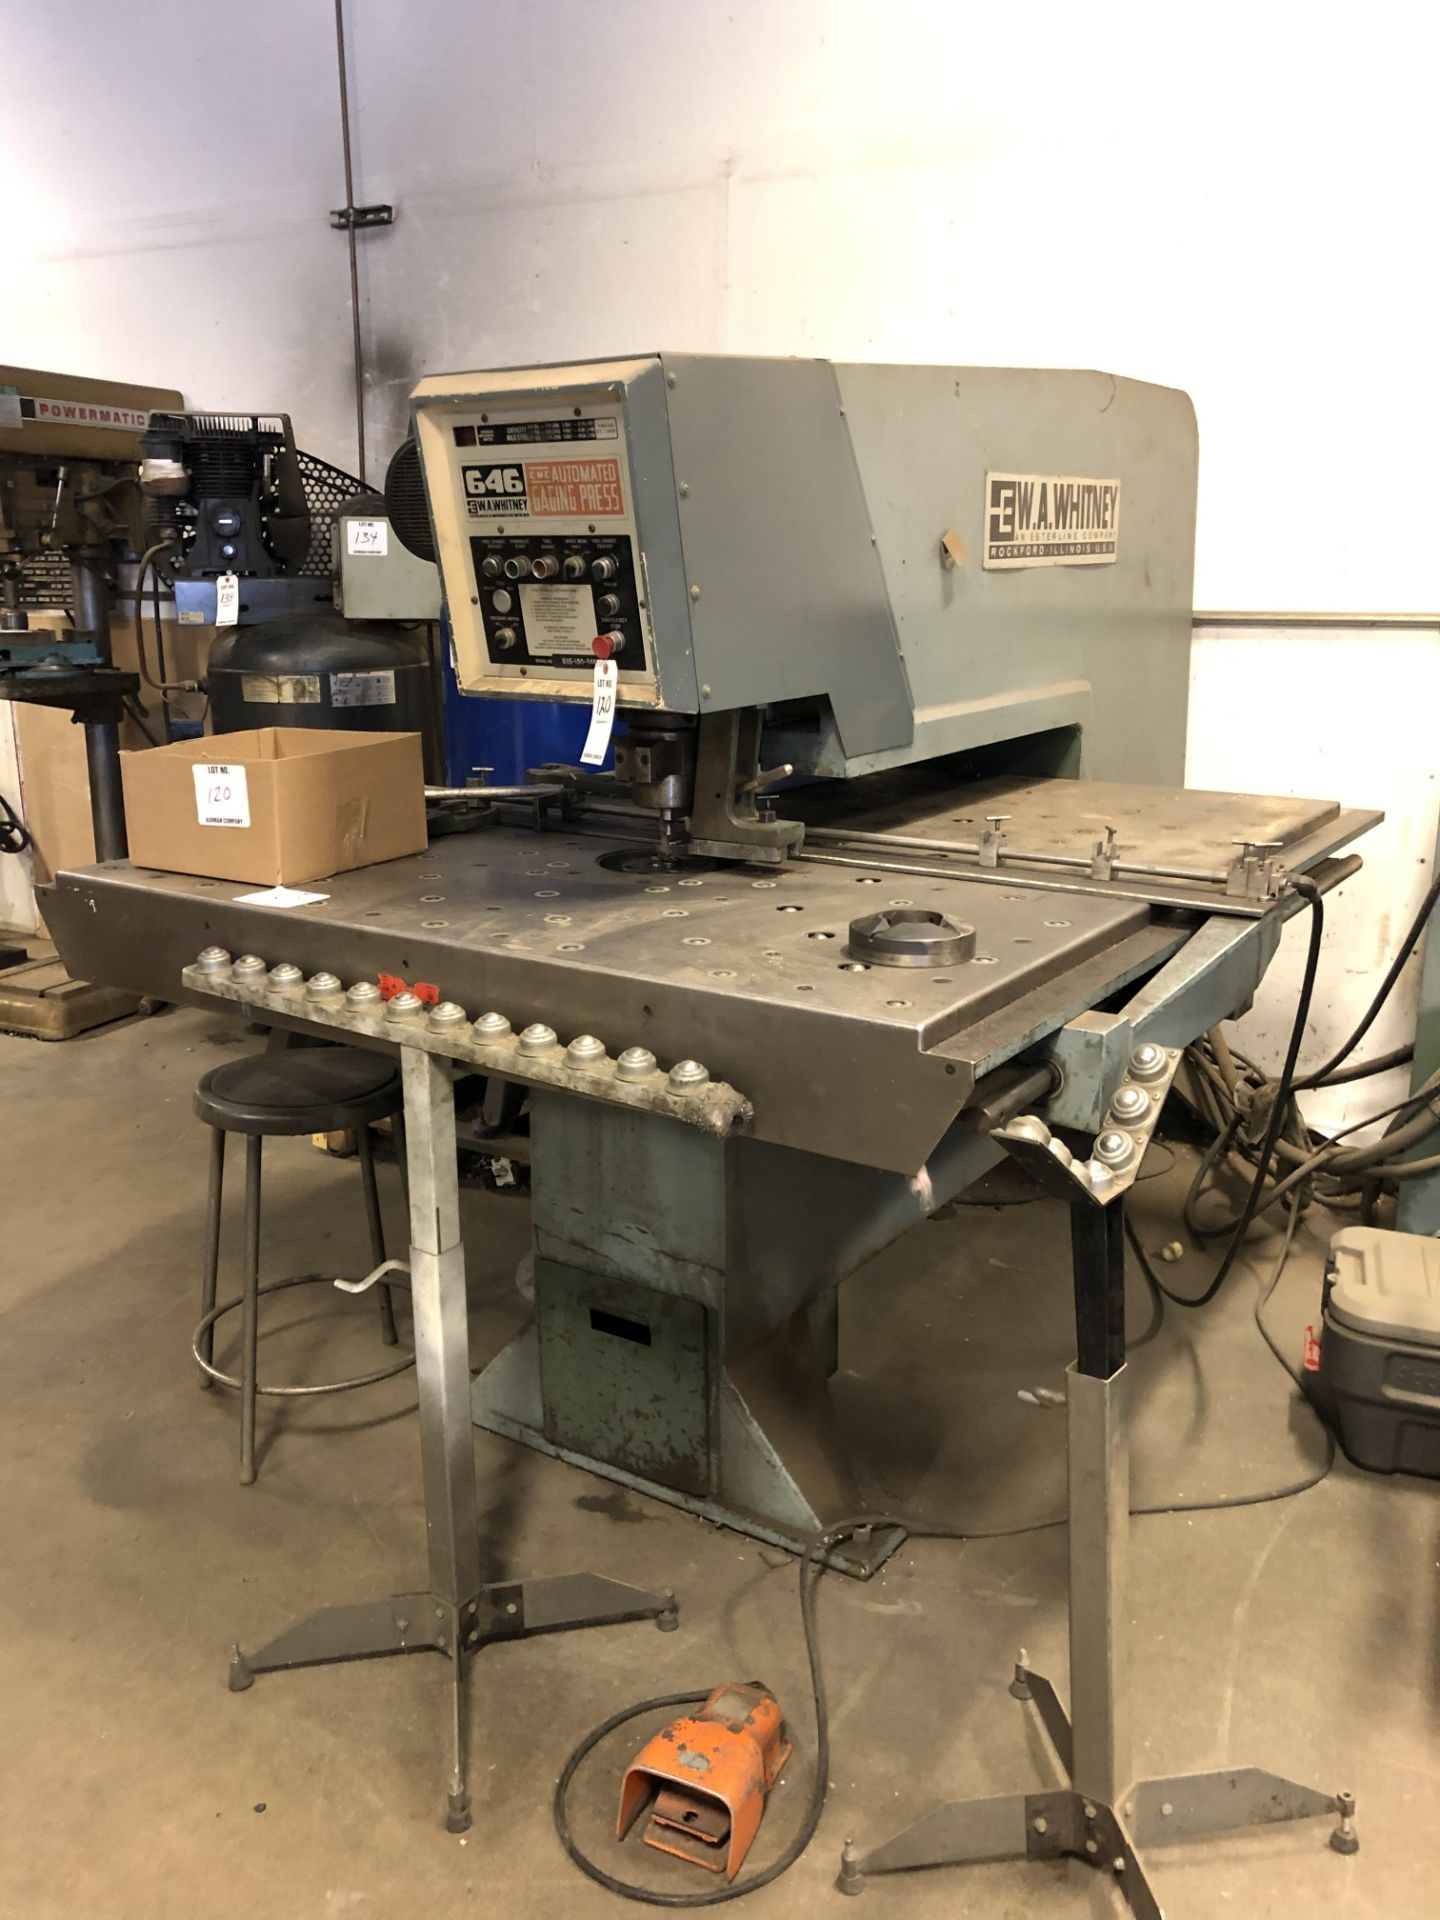 (1) W.A. Whitney 646 CNC Punch Press- 30 ton cap, jog/nibble modes, 10 hp, 36” throat depth, with